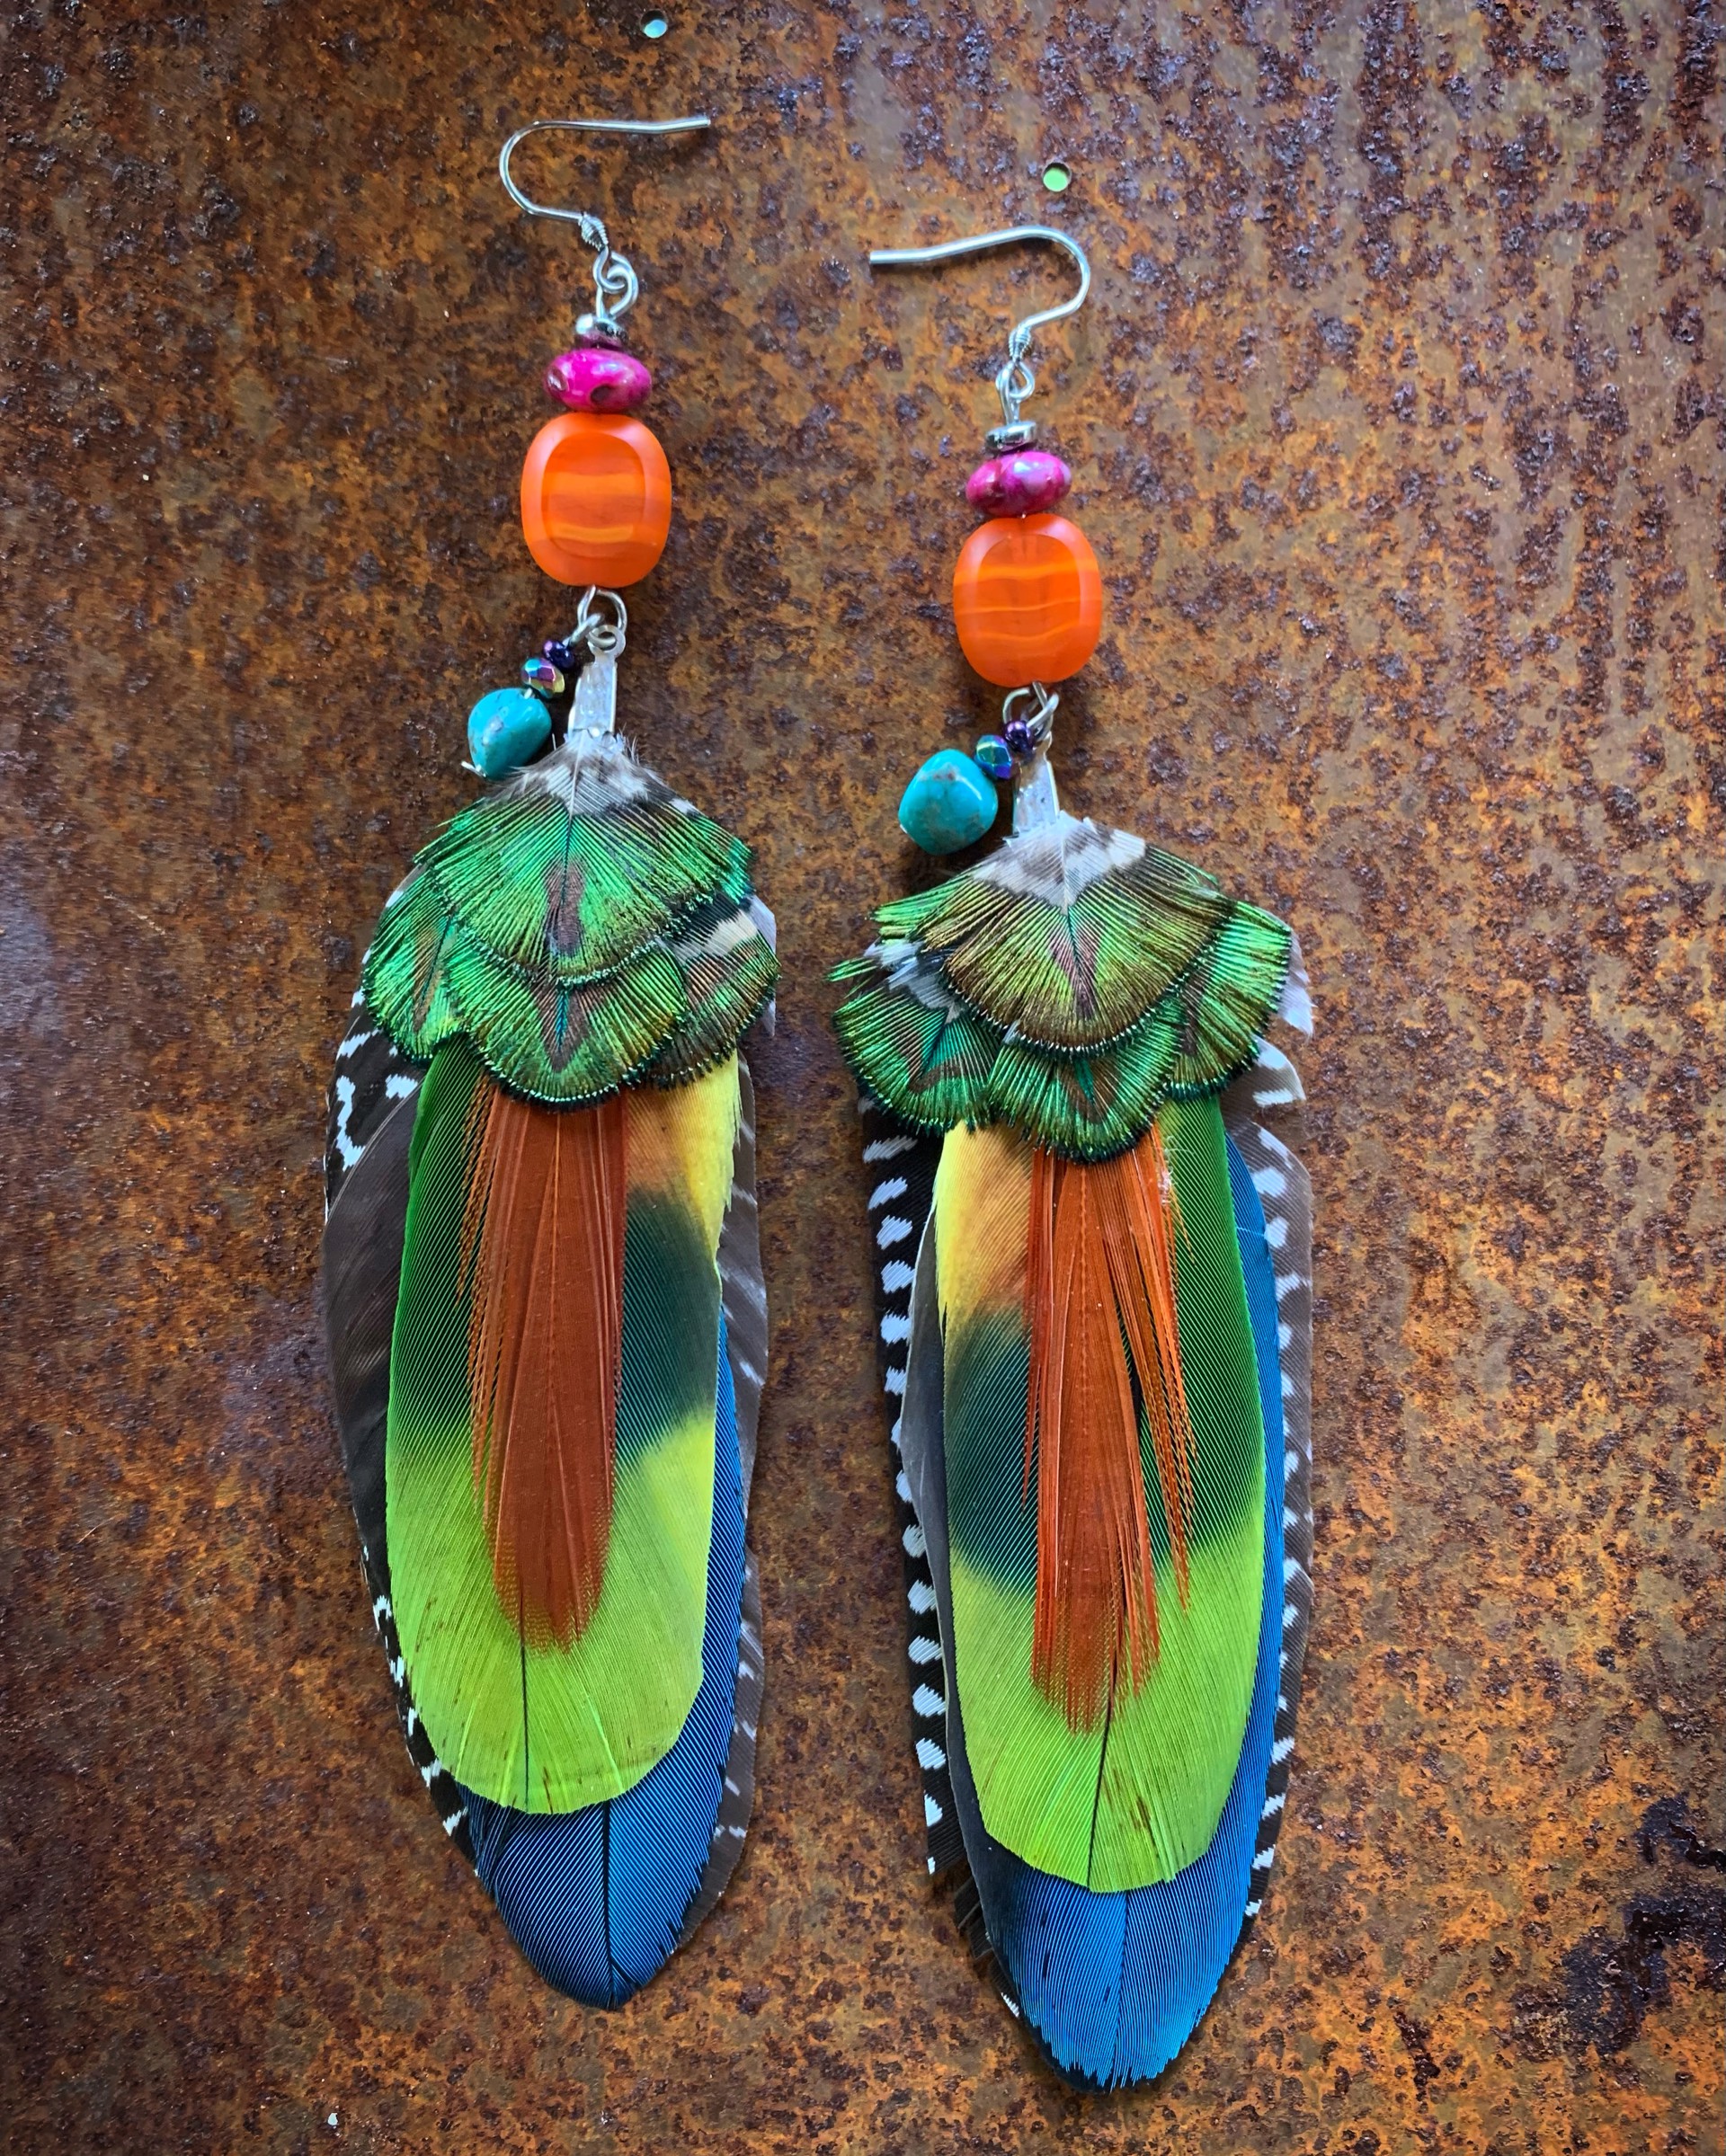 K672 Ethically Sourced Parrot Earrings Eye Candy by Kelly Ormsby